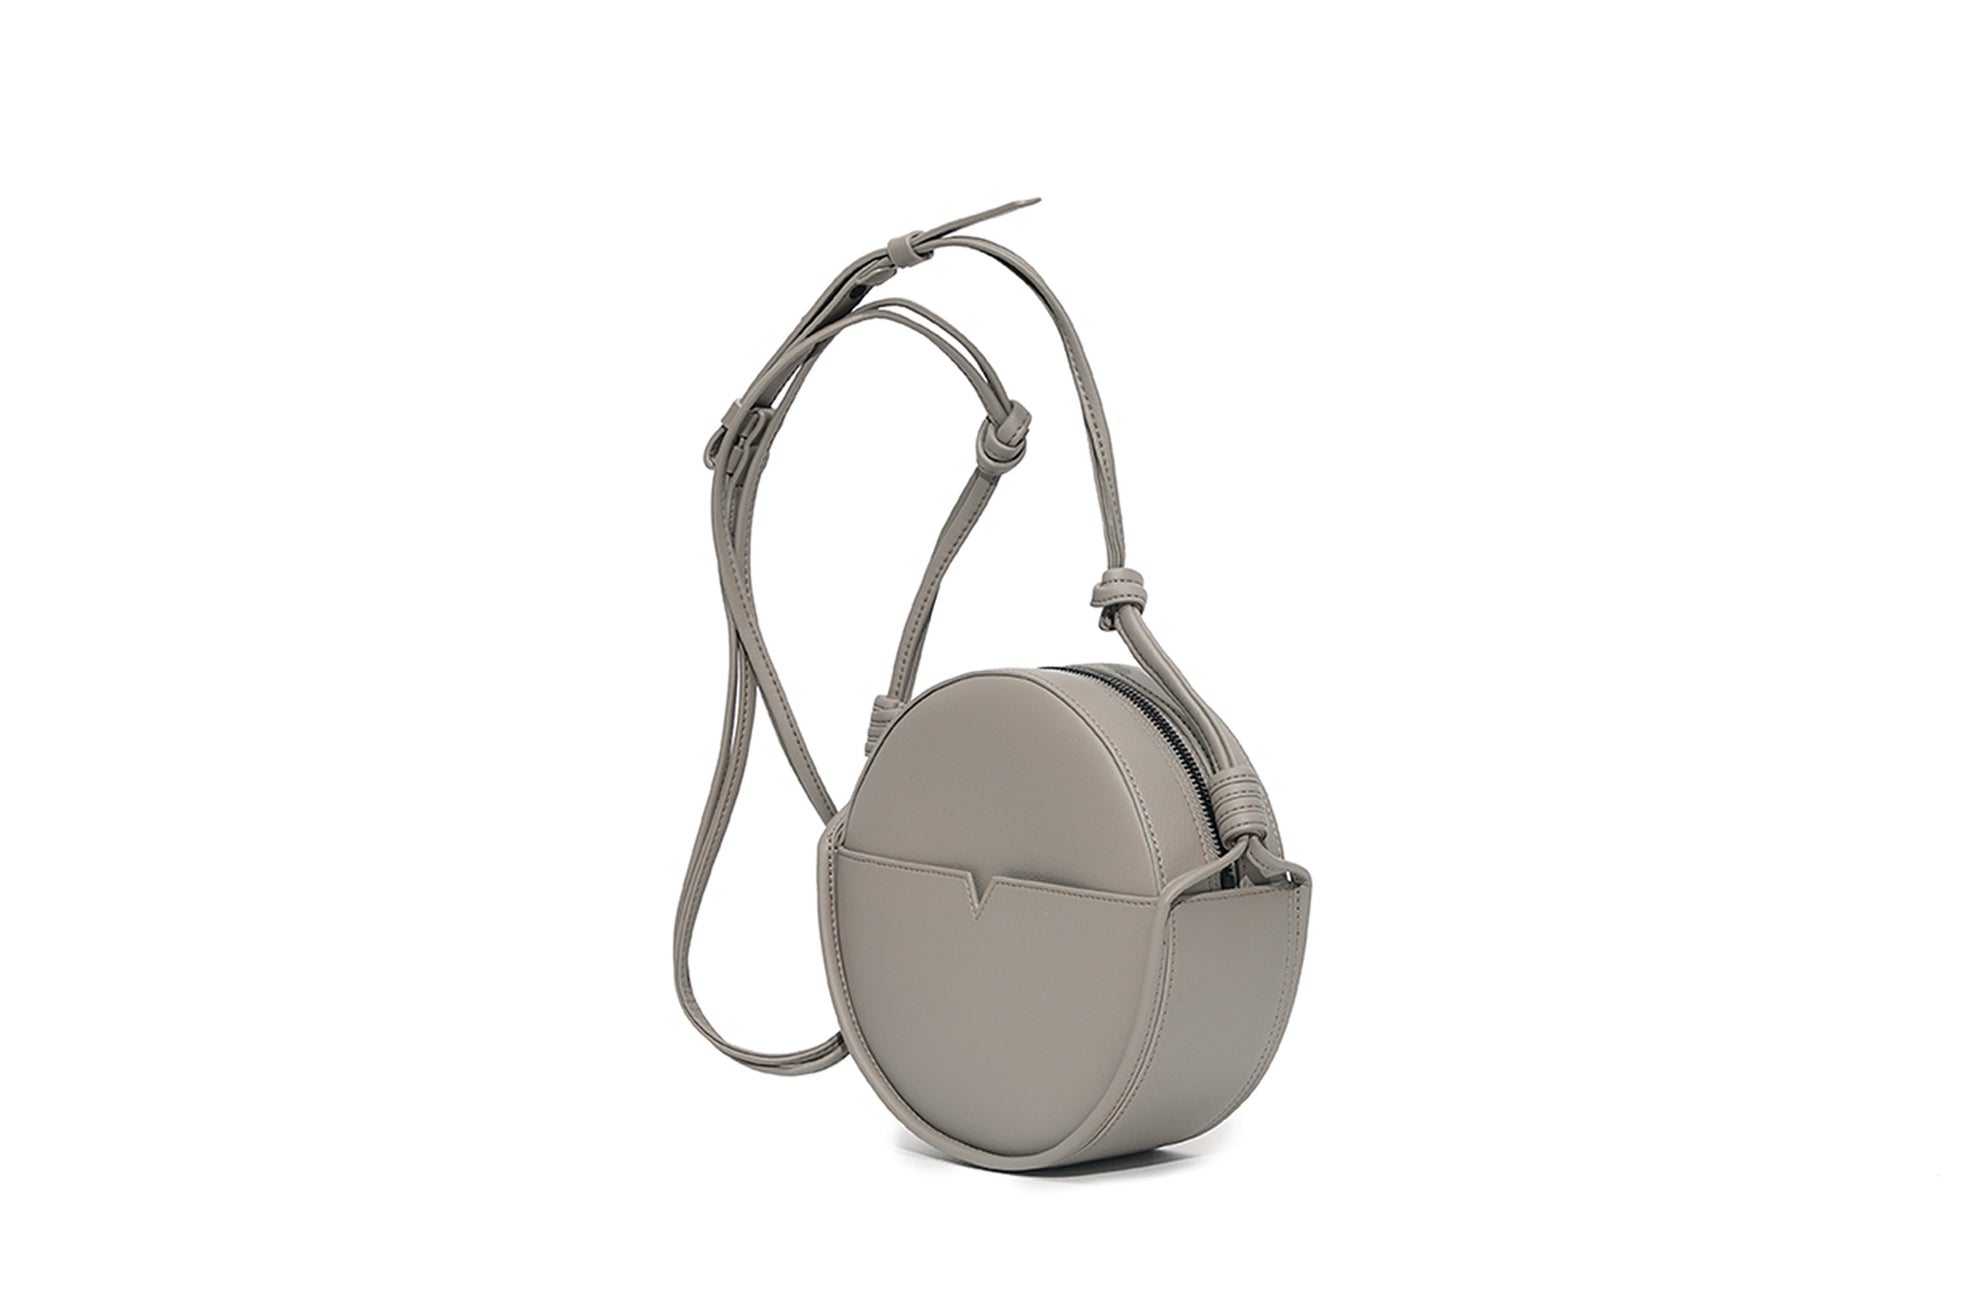 The Circle Crossbody in Banbū Leather in Stone image 3